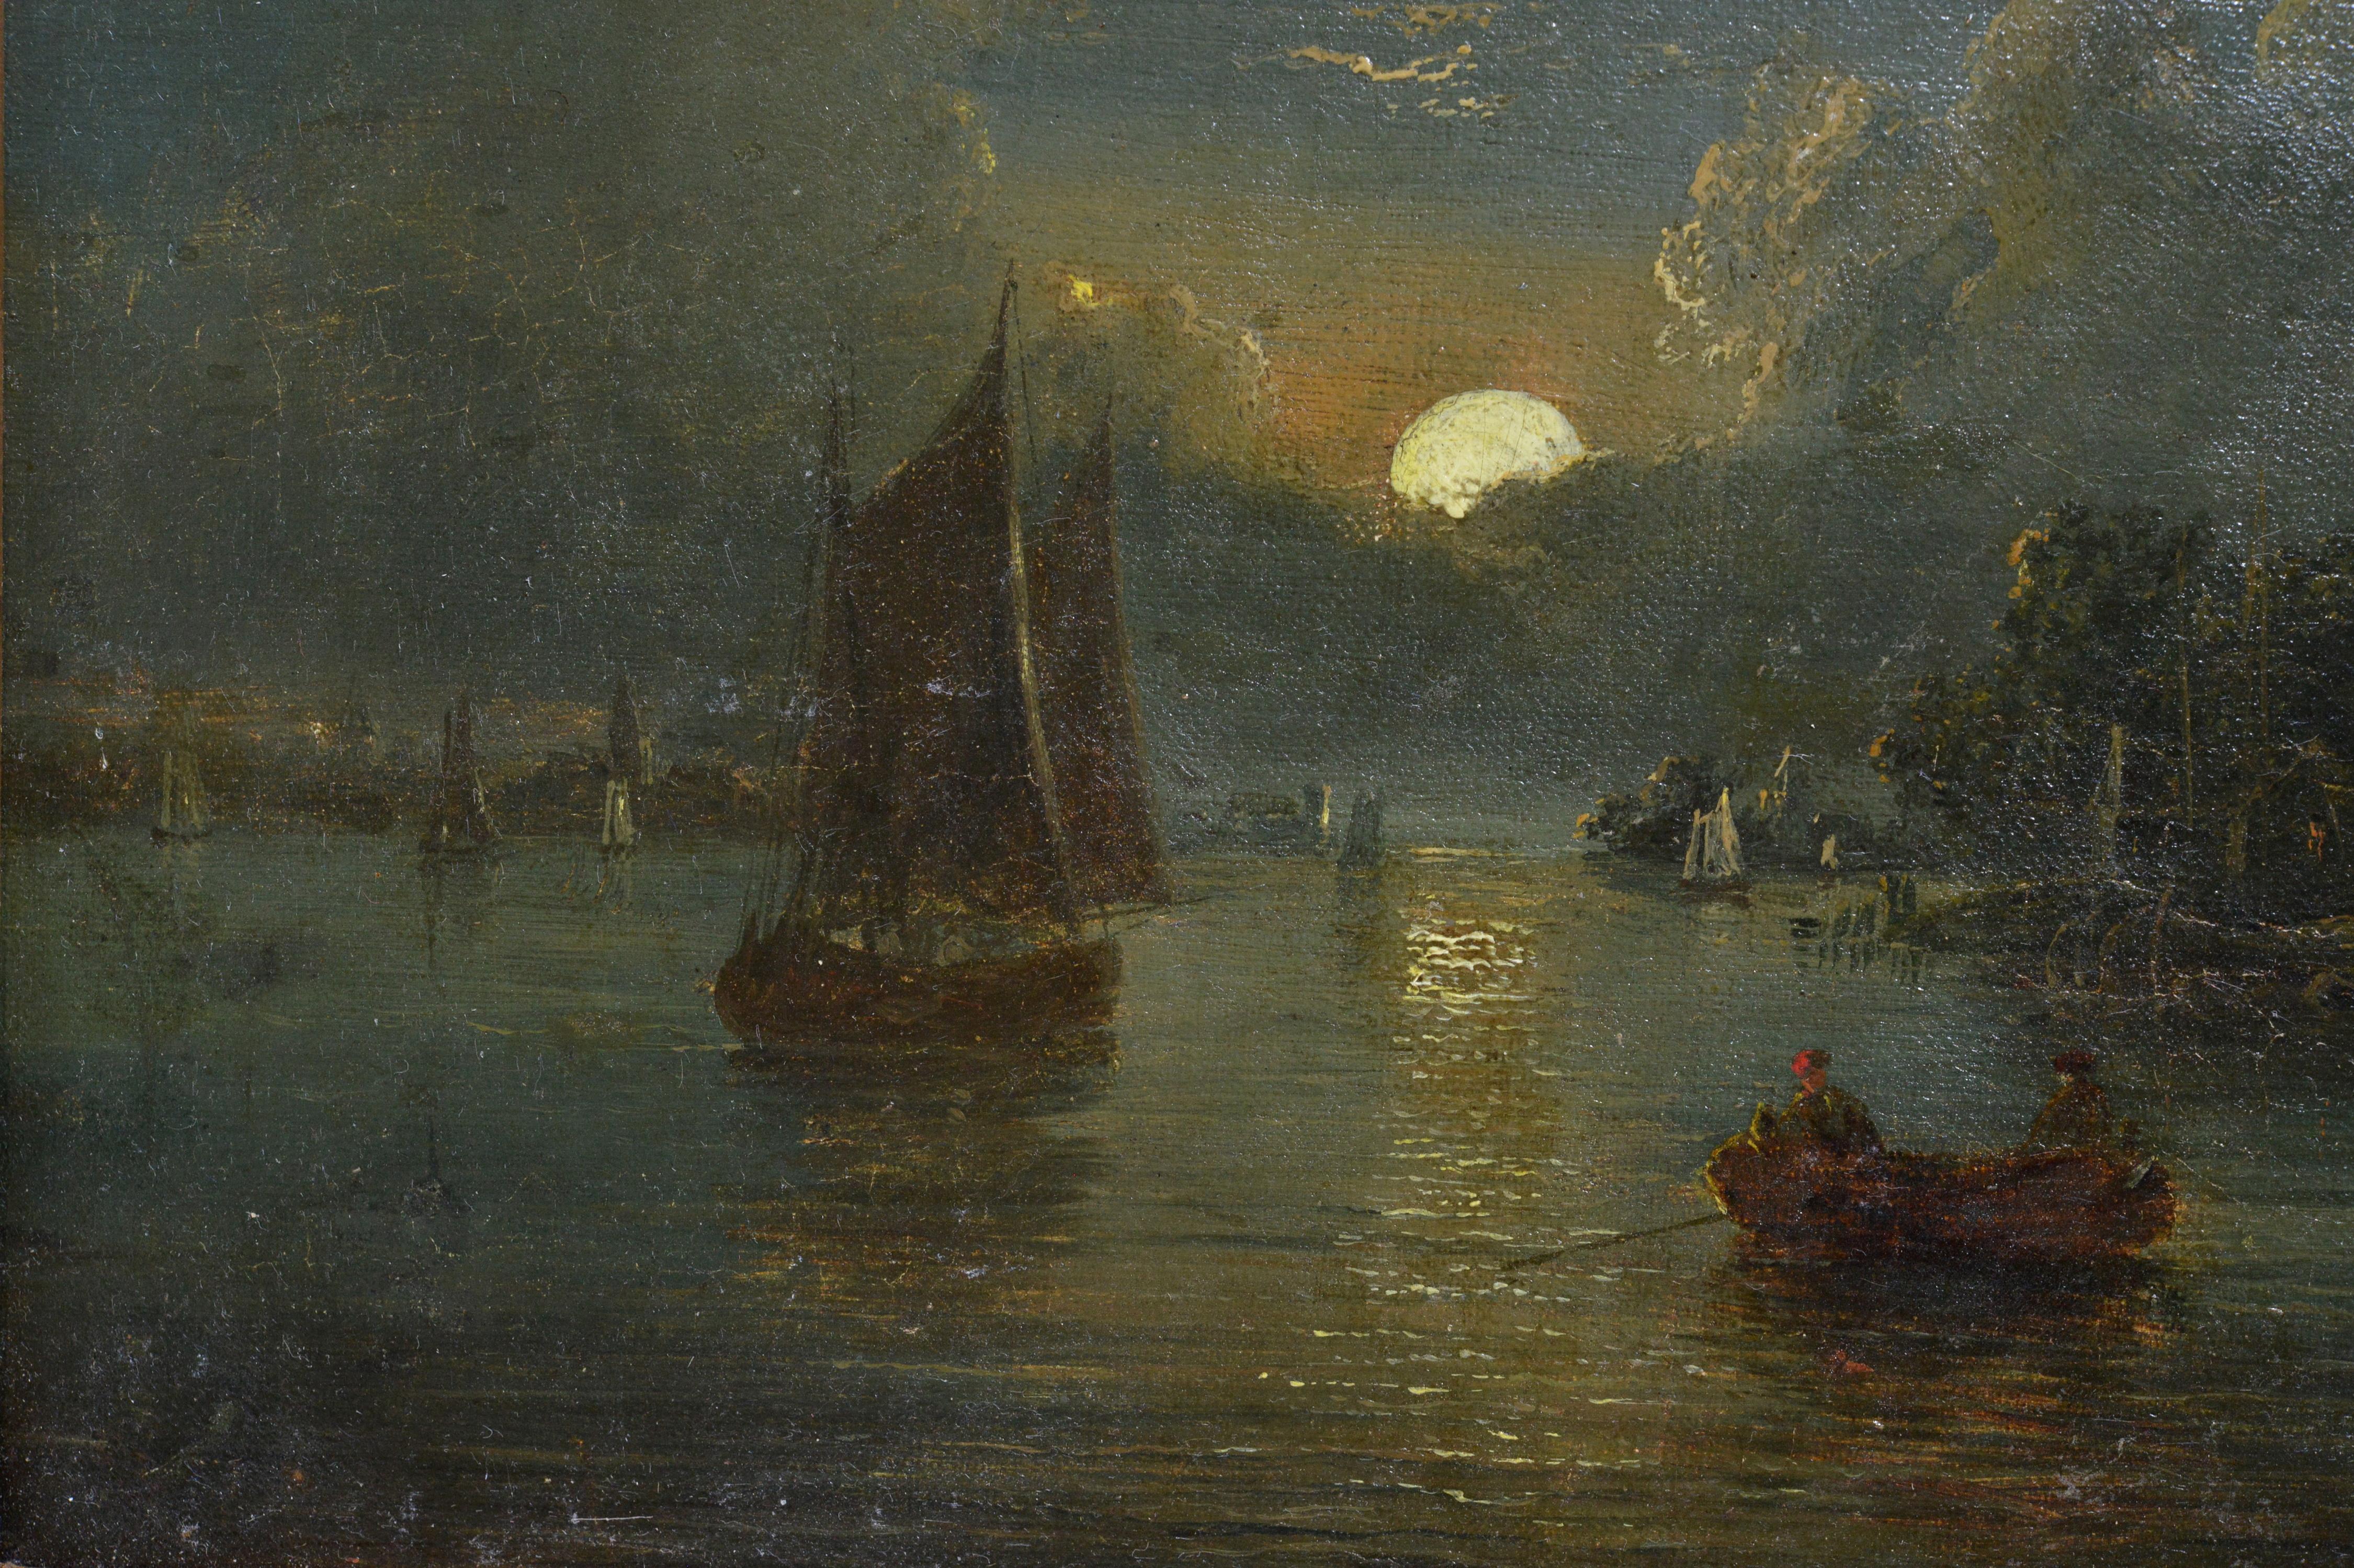 British seascape Fishing boats in moonlight 19th century Oil painting Signed - Realist Painting by John Berney Crome